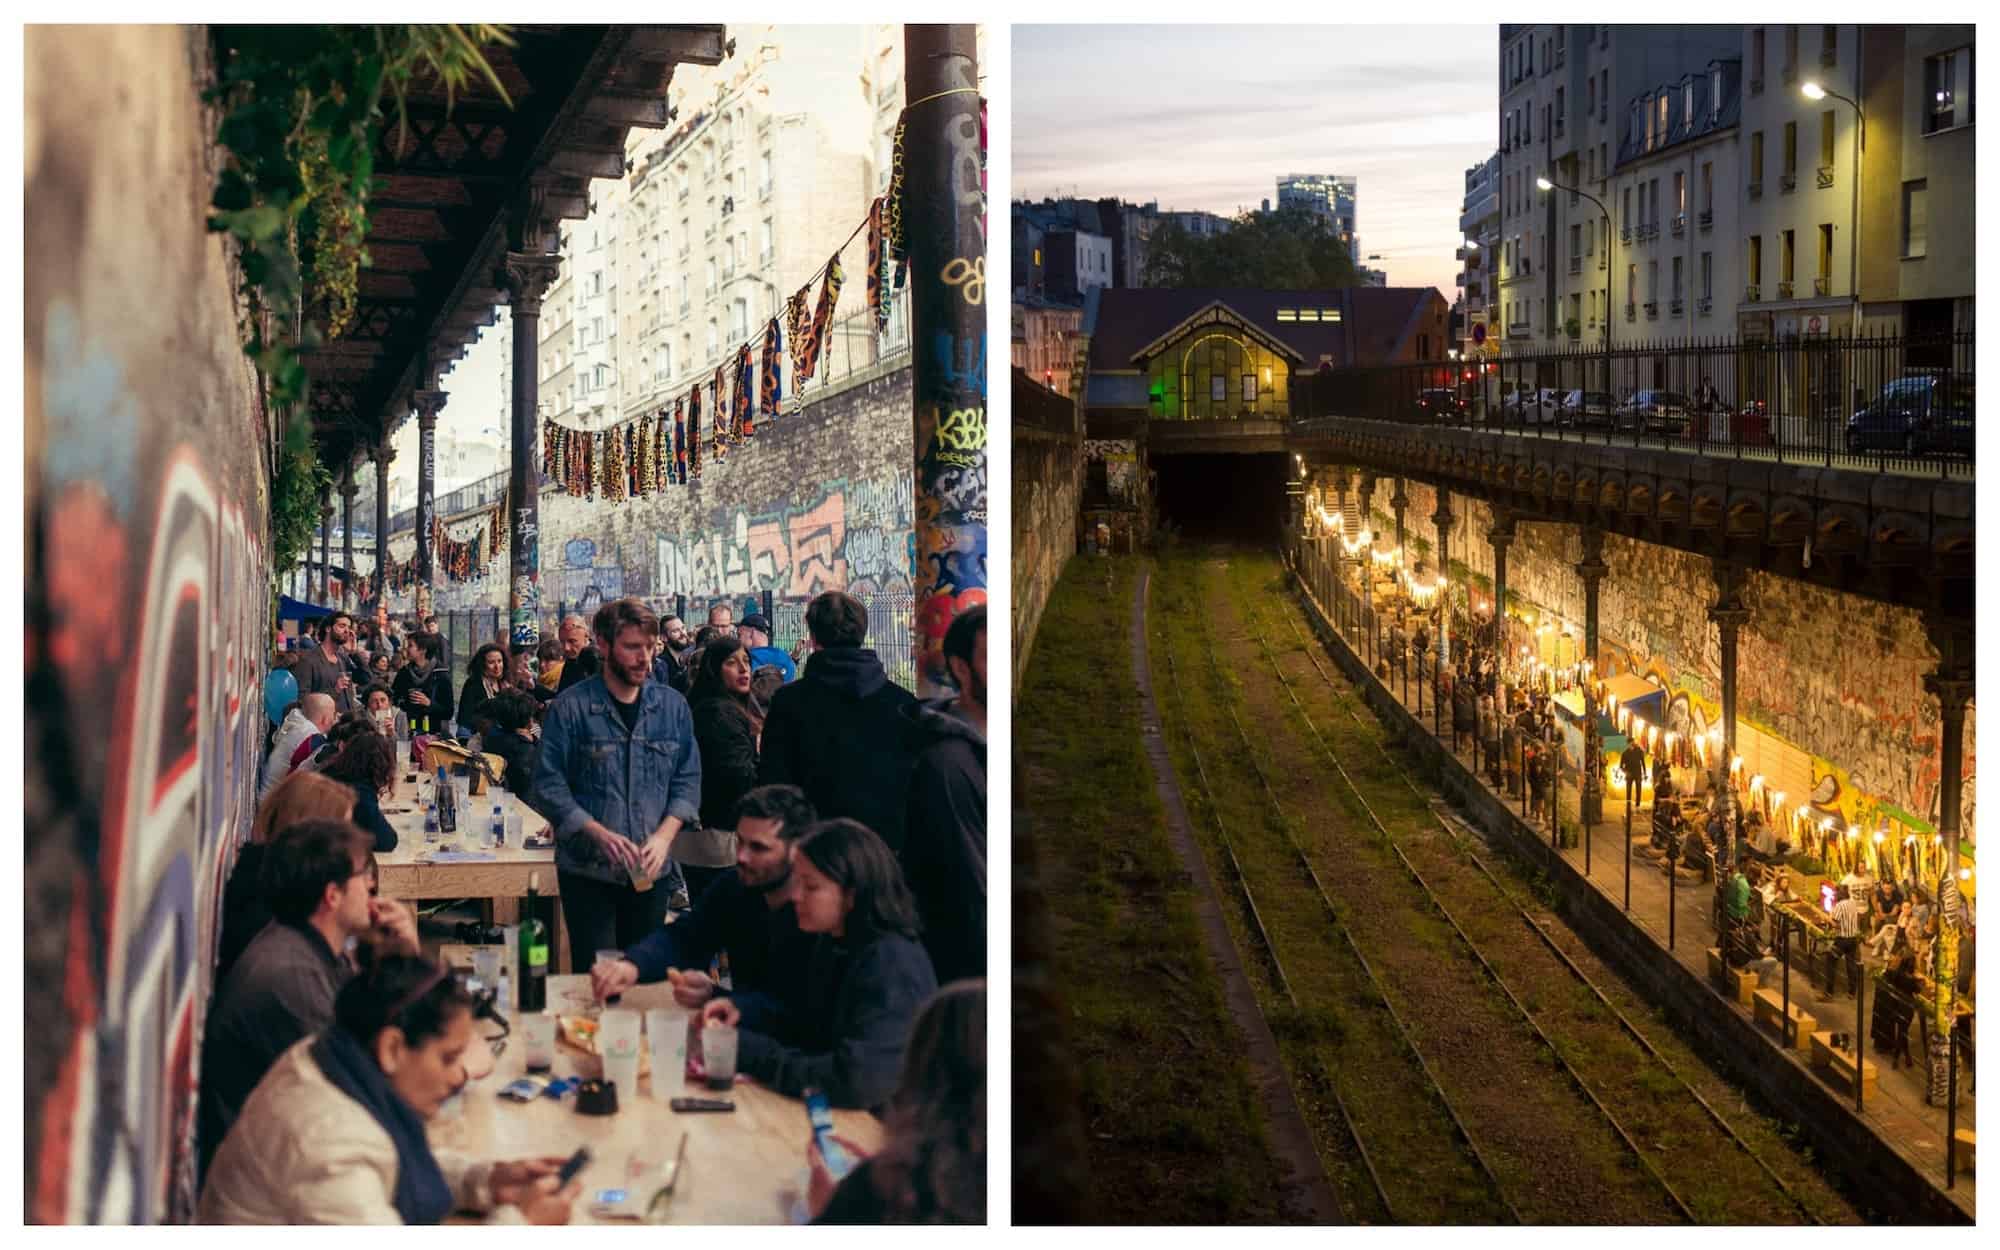 People having drinks on the terrace of Paris bar le Hasard Ludique, on the old platform of an abandoned train station (left). View from the street of the terrace lit up at night down by the disused railway (right).